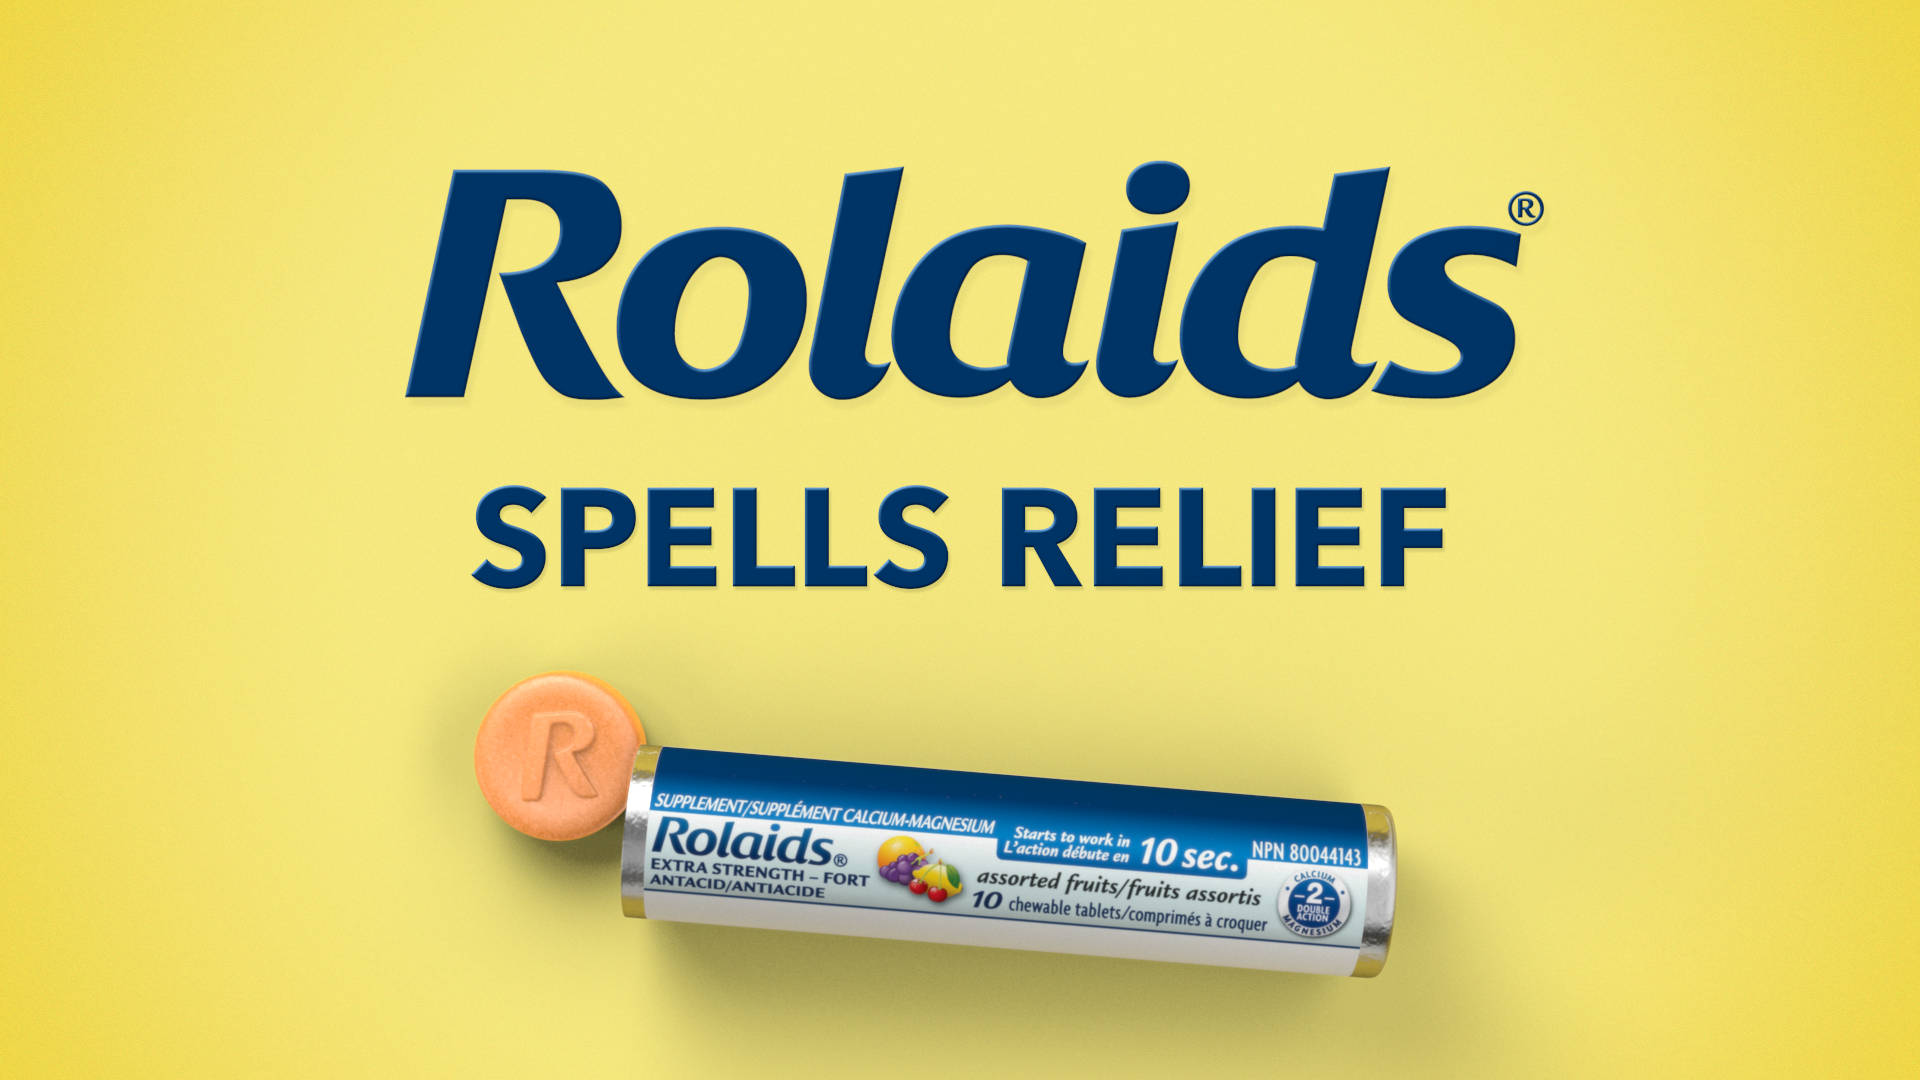 The Rolaids logo on a yellow background.